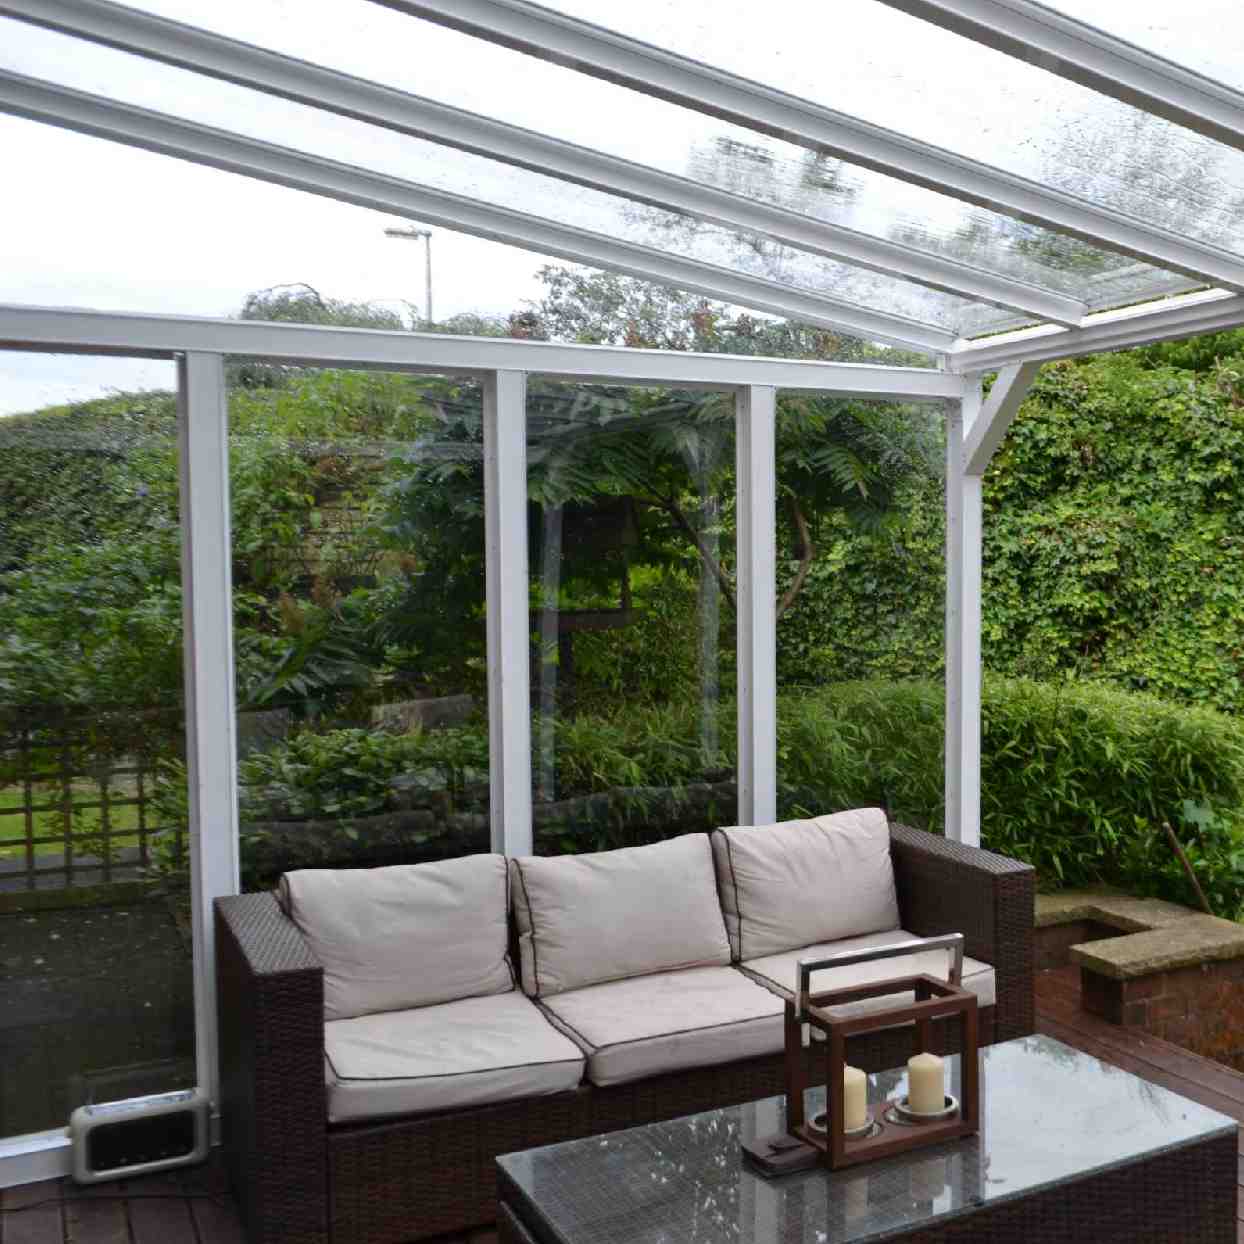 Buy Omega Verandah White with 16mm Polycarbonate Glazing - 9.5m (W) x 2.0m (P), (5) Supporting Posts online today